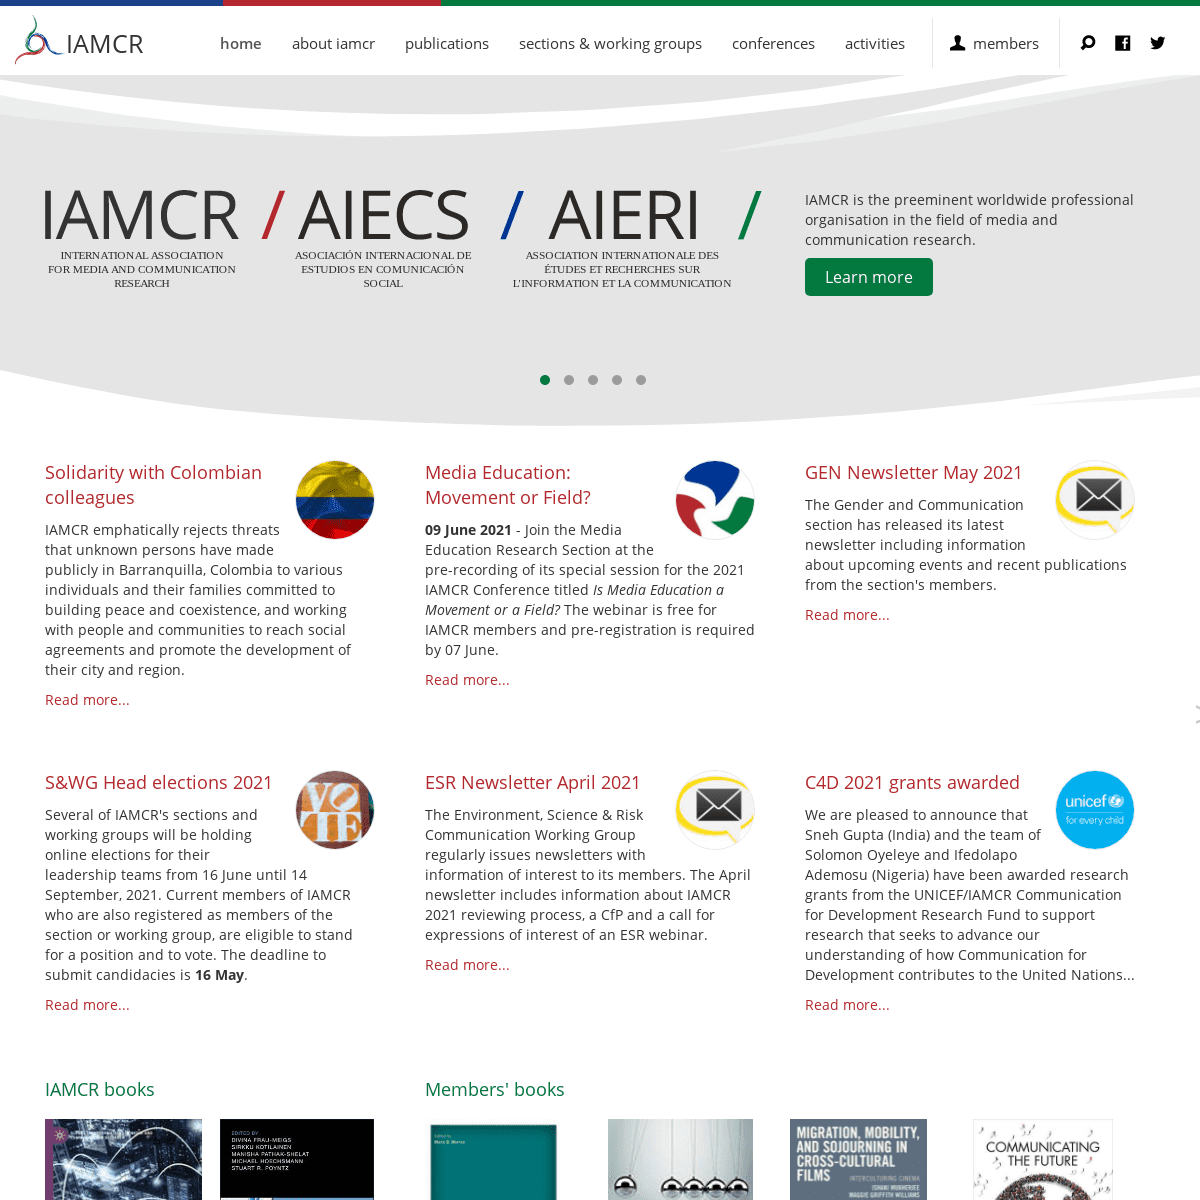 A complete backup of https://iamcr.org